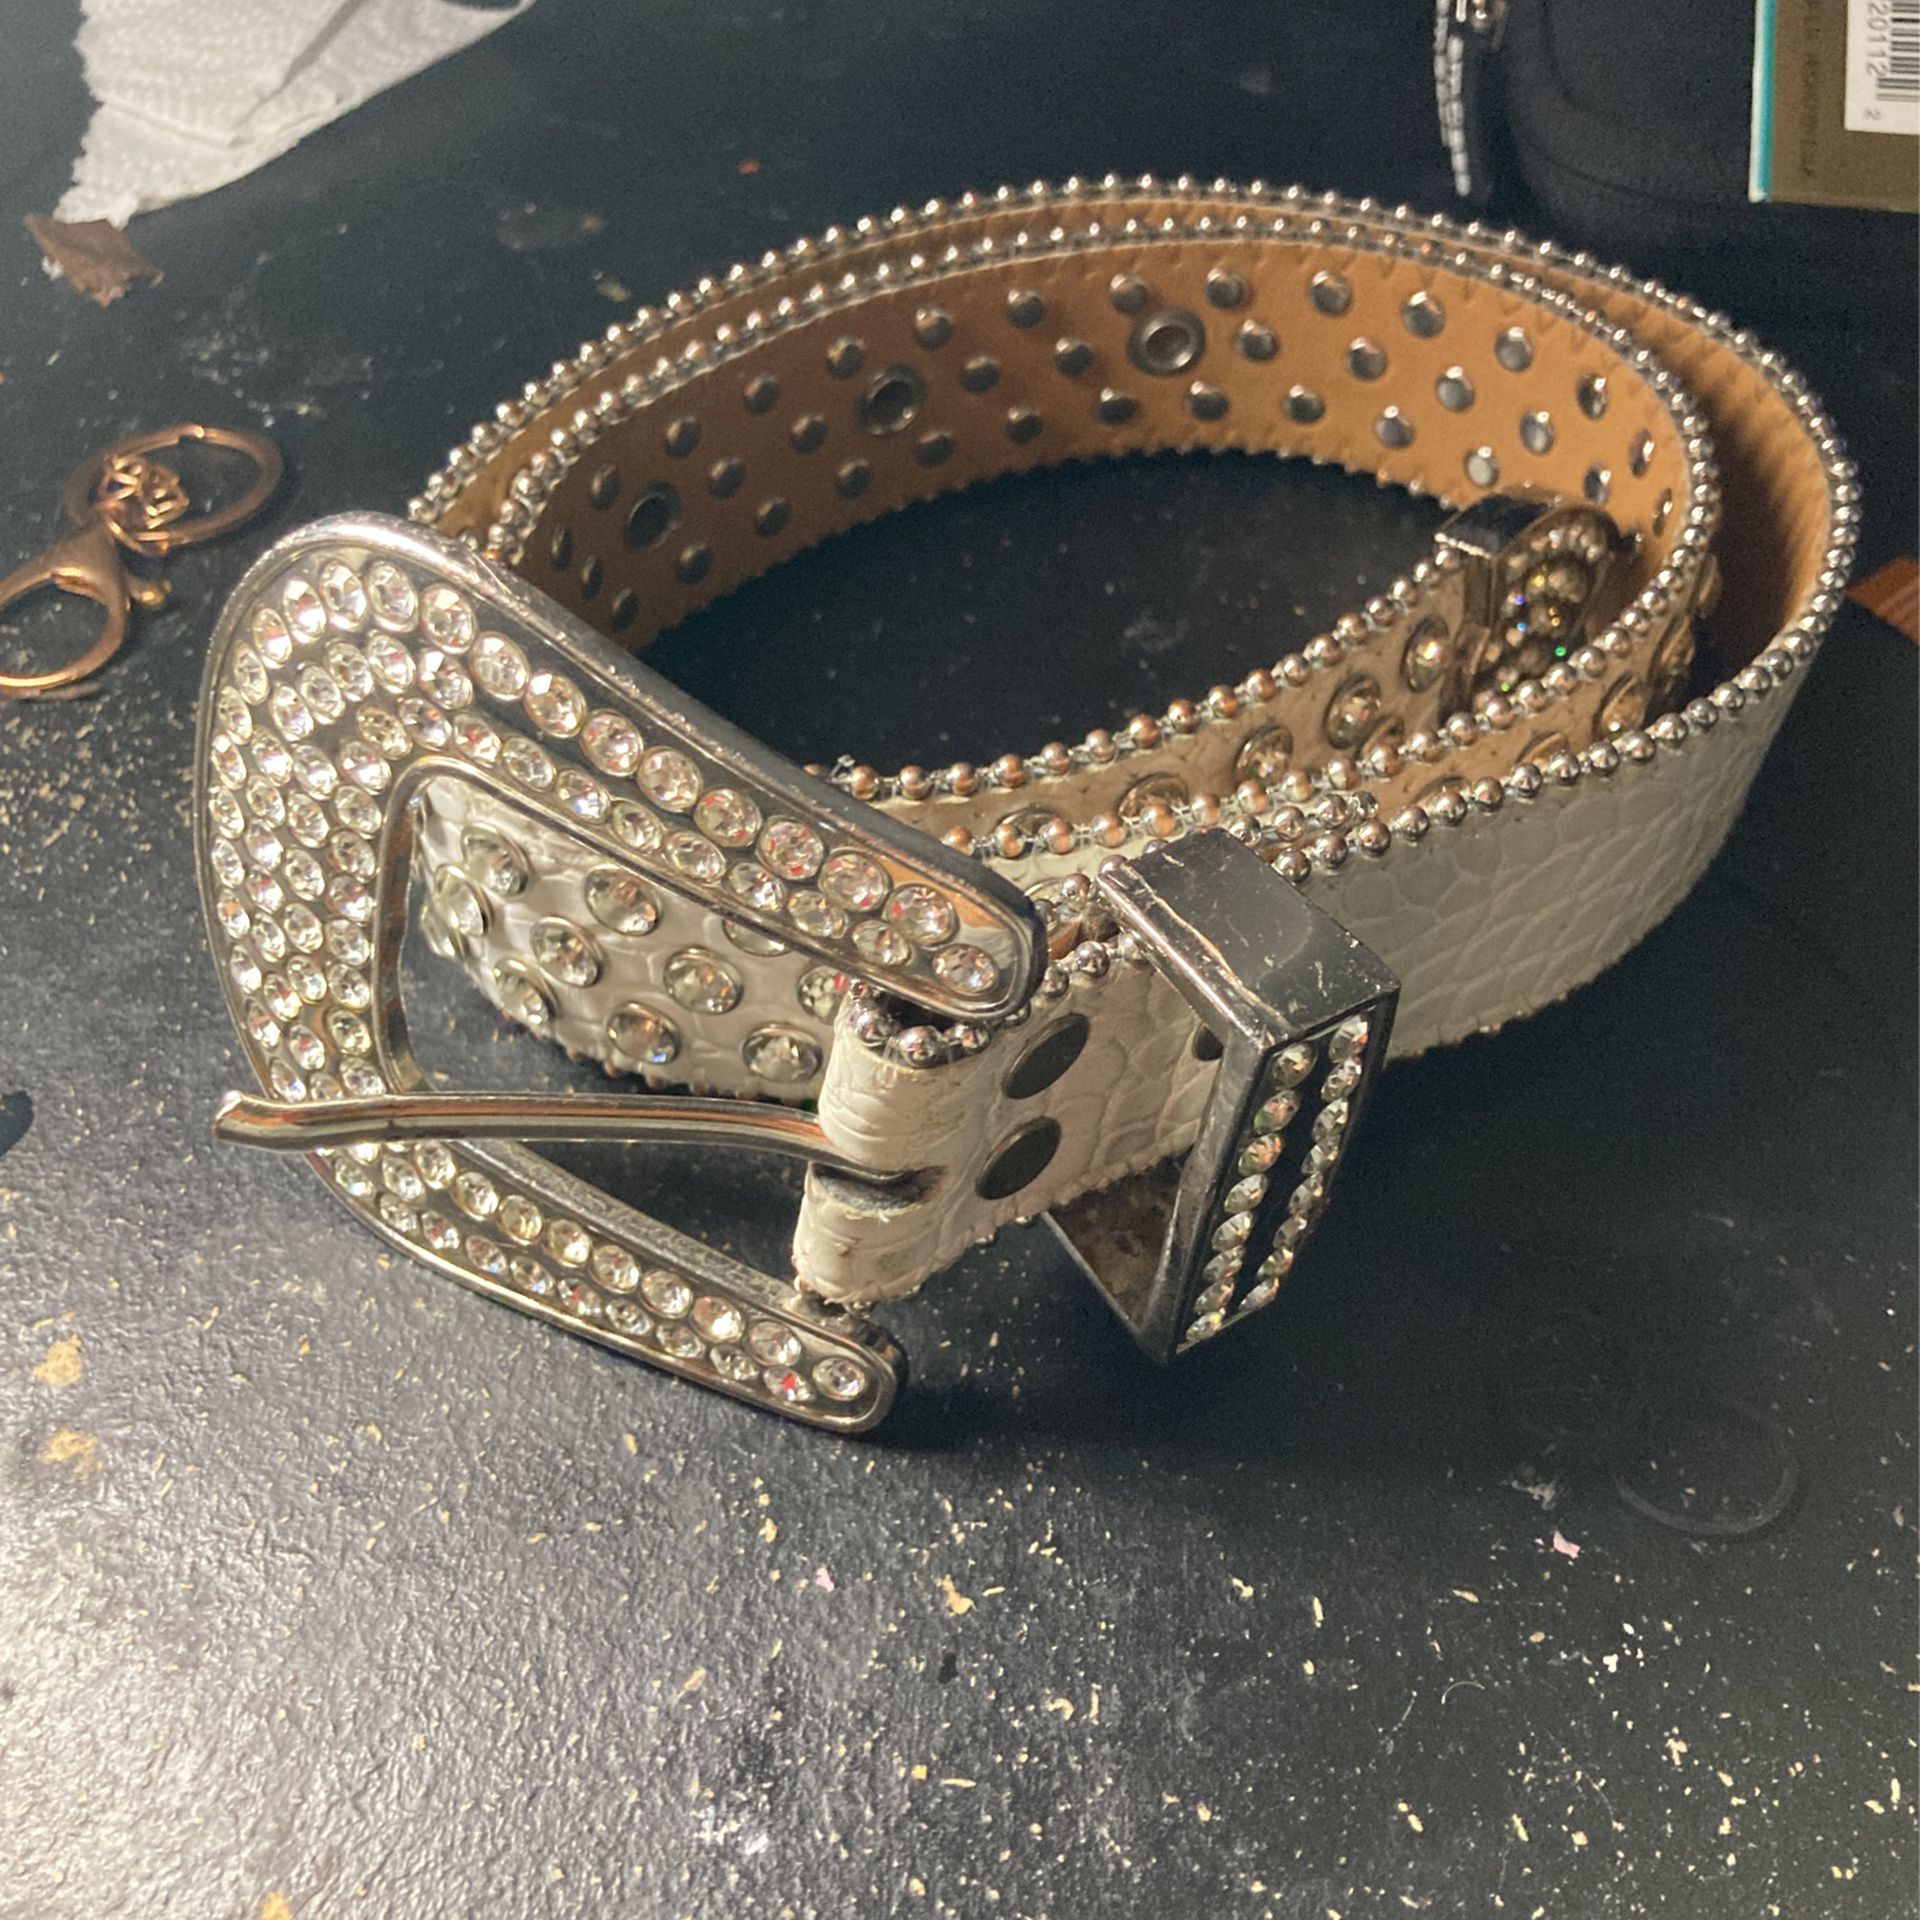 BB Simon Belt The Silver Skull Pile for Sale in Victorville, CA - OfferUp